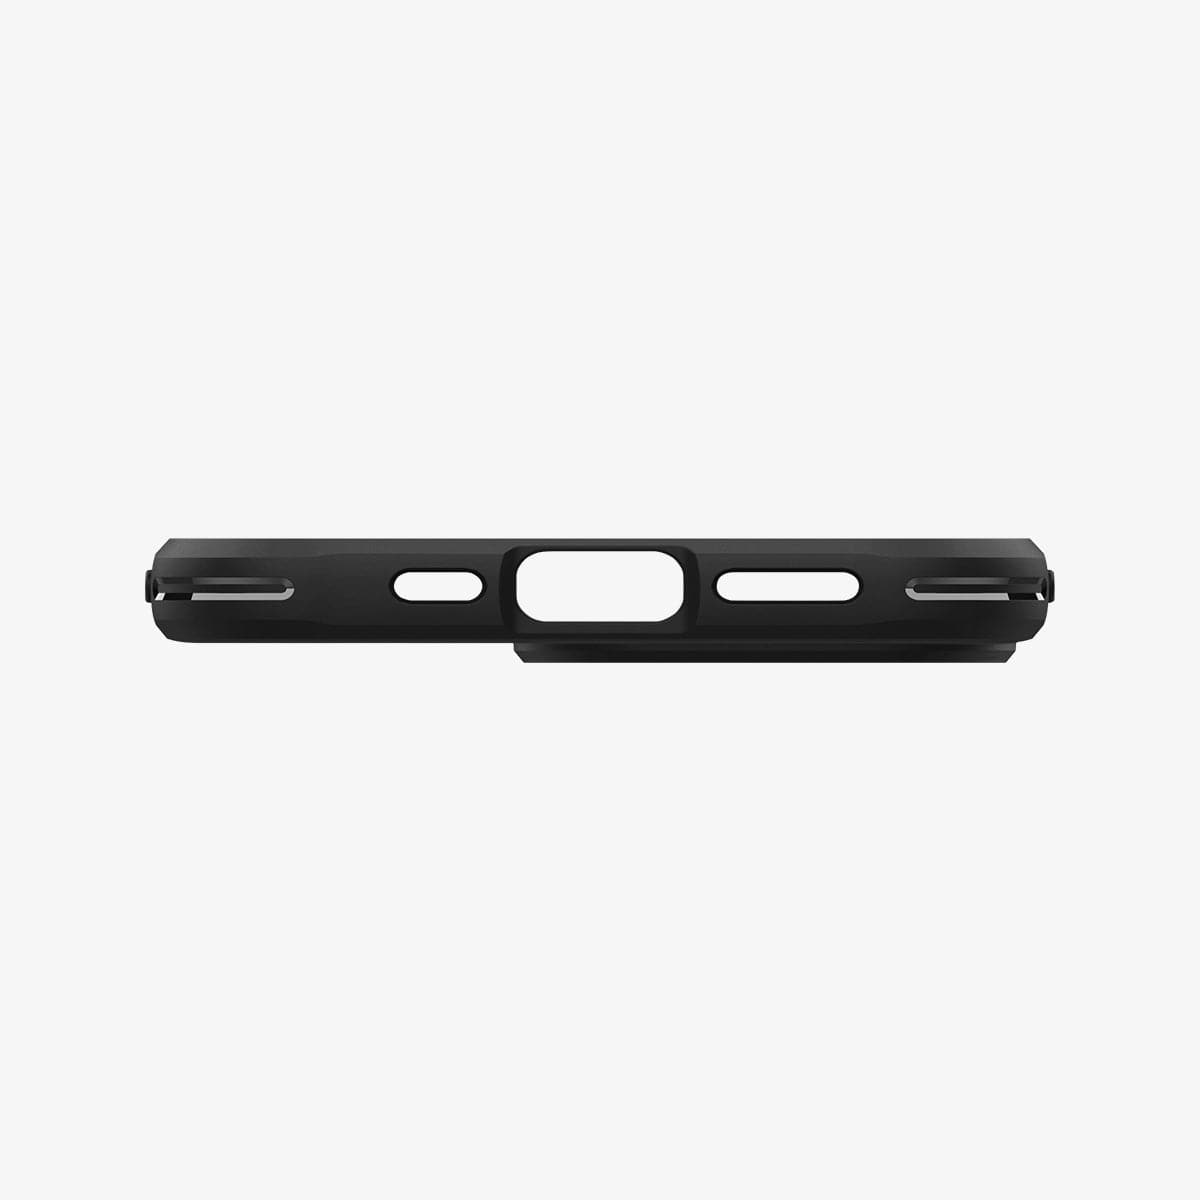 ACS03257 - iPhone 13 Pro Case Rugged Armor in black showing the bottom with precise cutouts